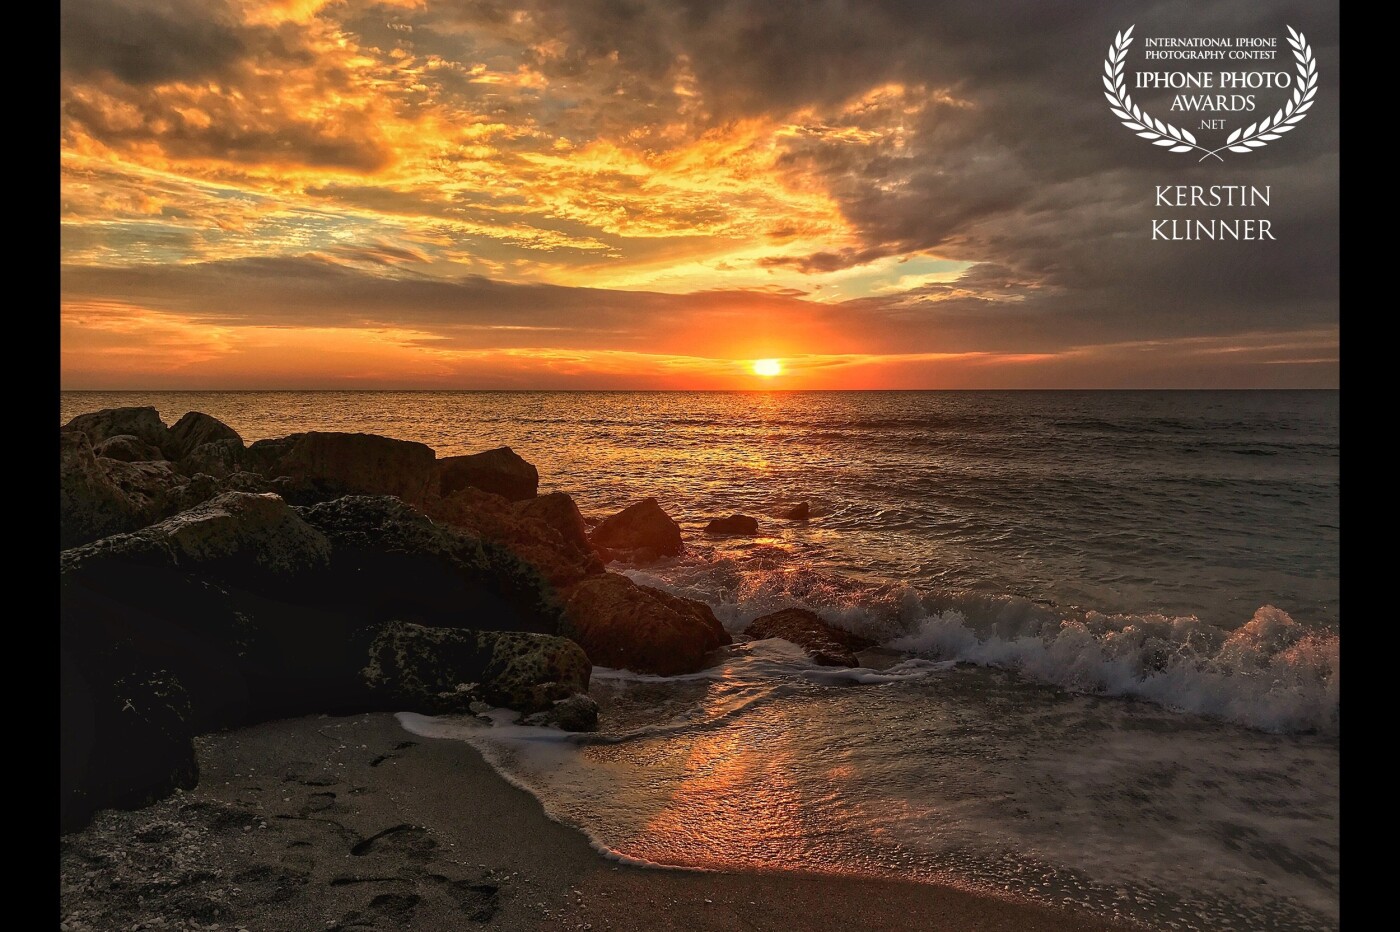 A beautiful day at Turner Beach (Captiva, Florida) was crowned with this magical sunset. This picture was taken with an iPhone 7 Pro.